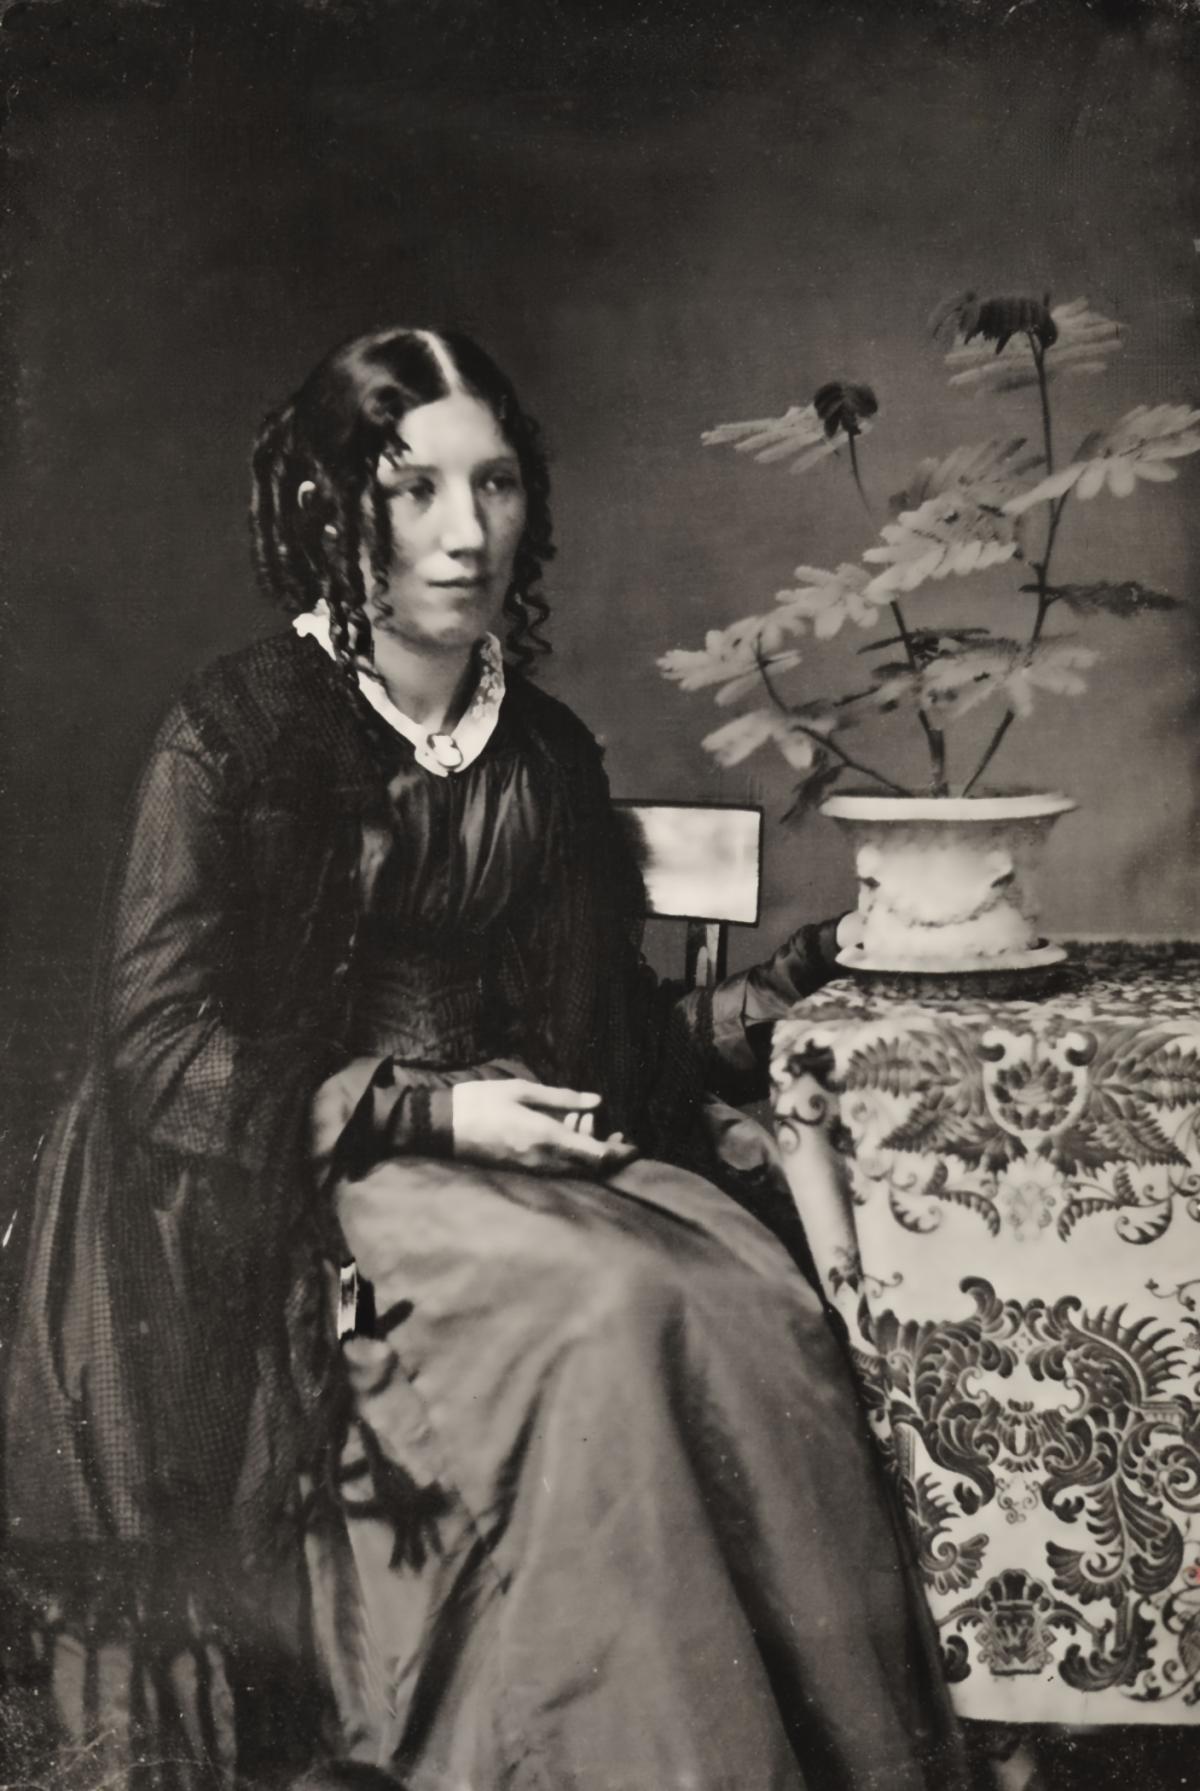 Stowe, with curled hair and wearing a dark shawl and dress, seated next to a table with a flower in a vase